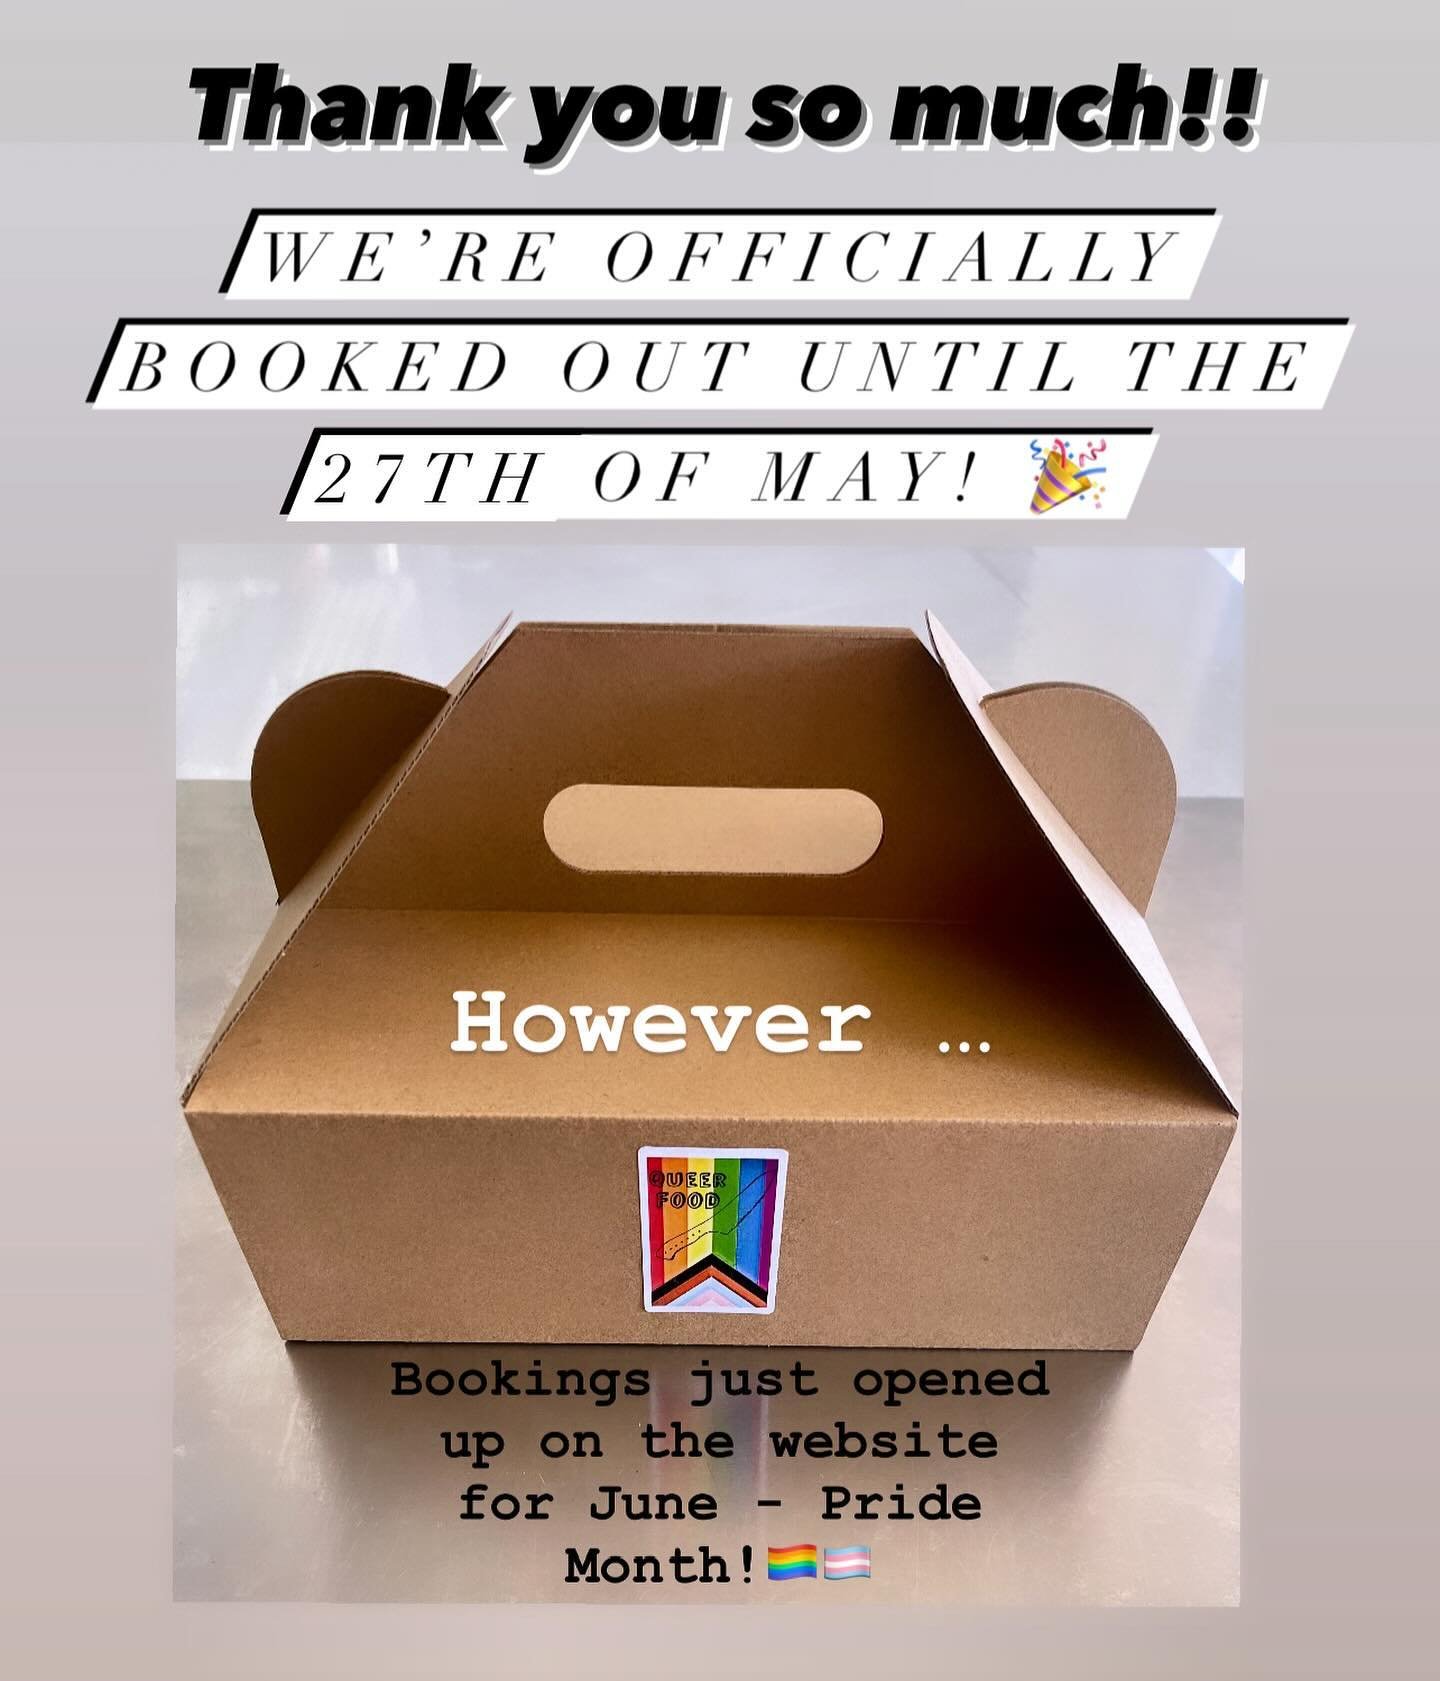 After getting a few questions at the event last night. I thought I&rsquo;d give an update on where we&rsquo;re at with Queer Food! 

We are in our soft launch era, which means you can book events, and we hire a local kitchen to make them happen.

How